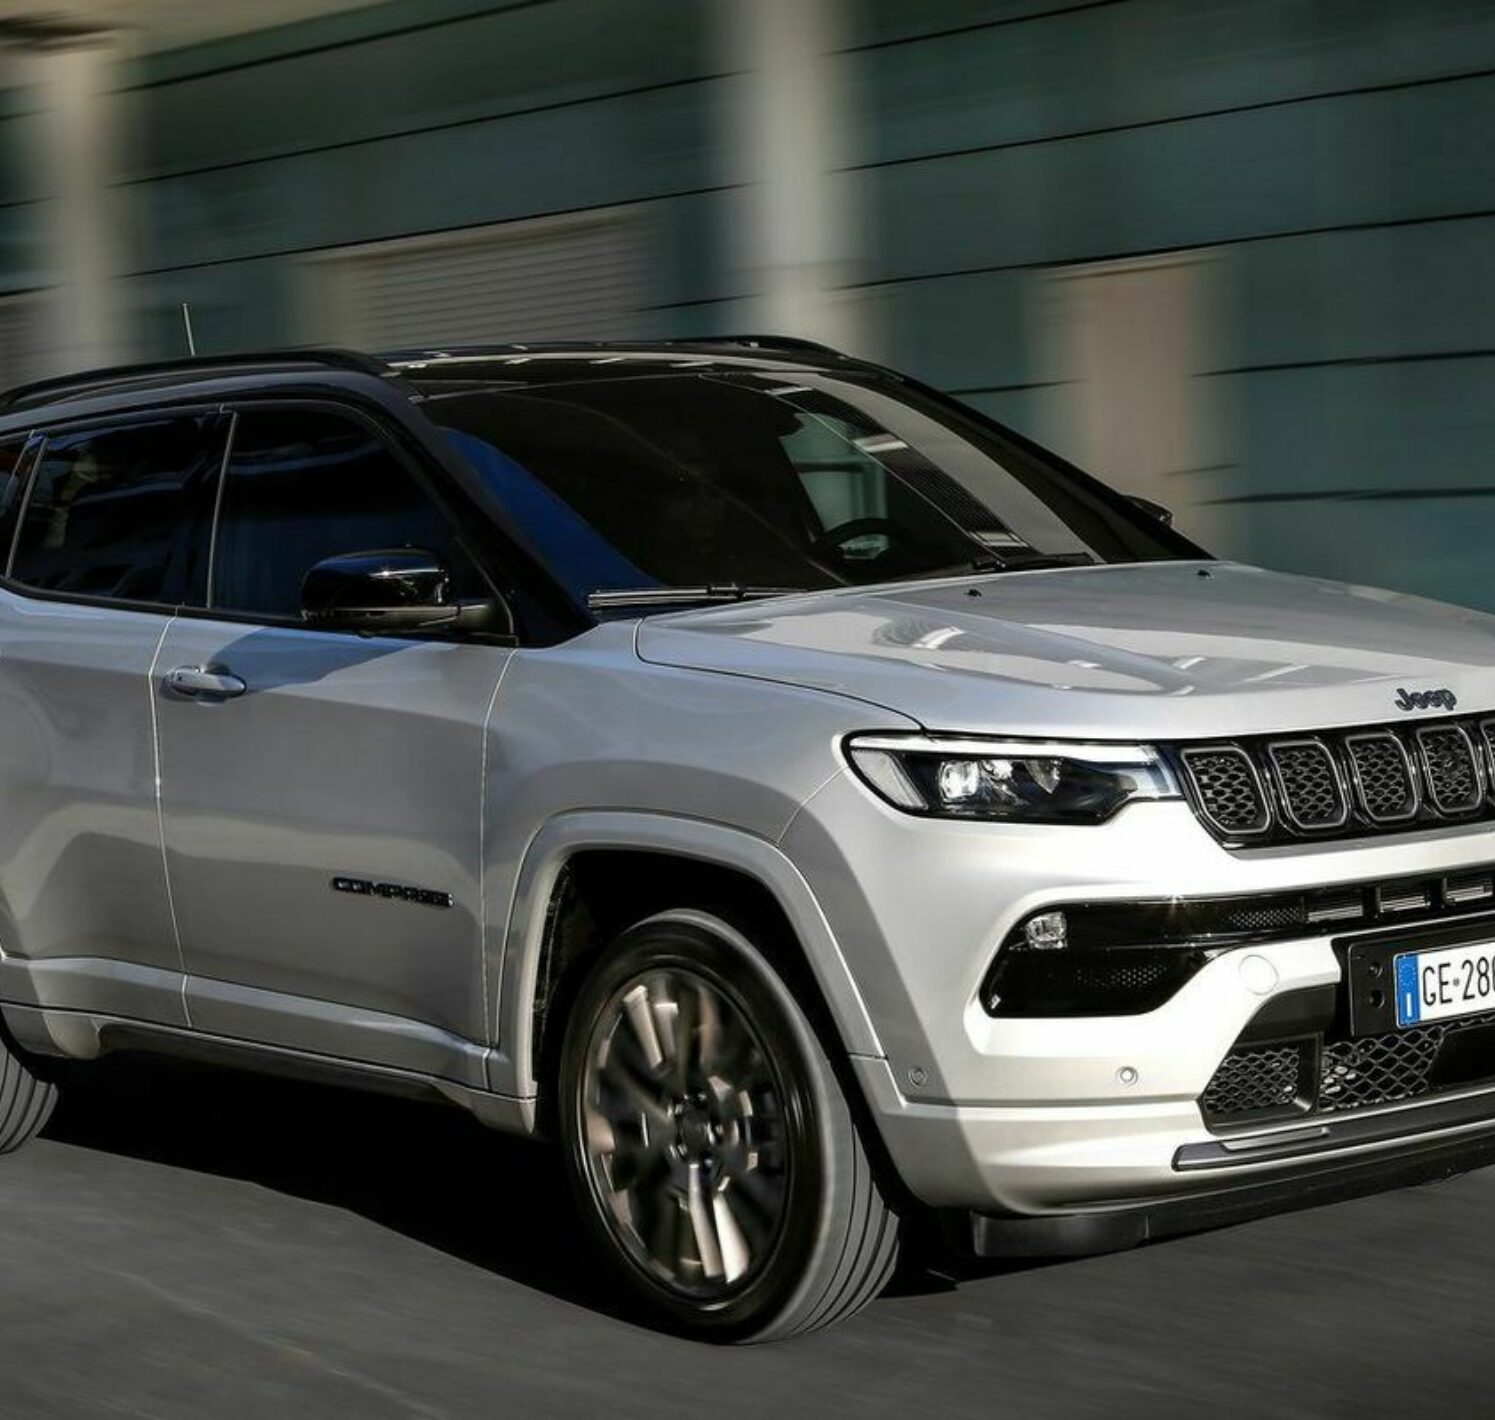 https://autofilter.sk/assets/images/compass/gallery/jeep-compass-2021_25-galeria.jpg - obrazok